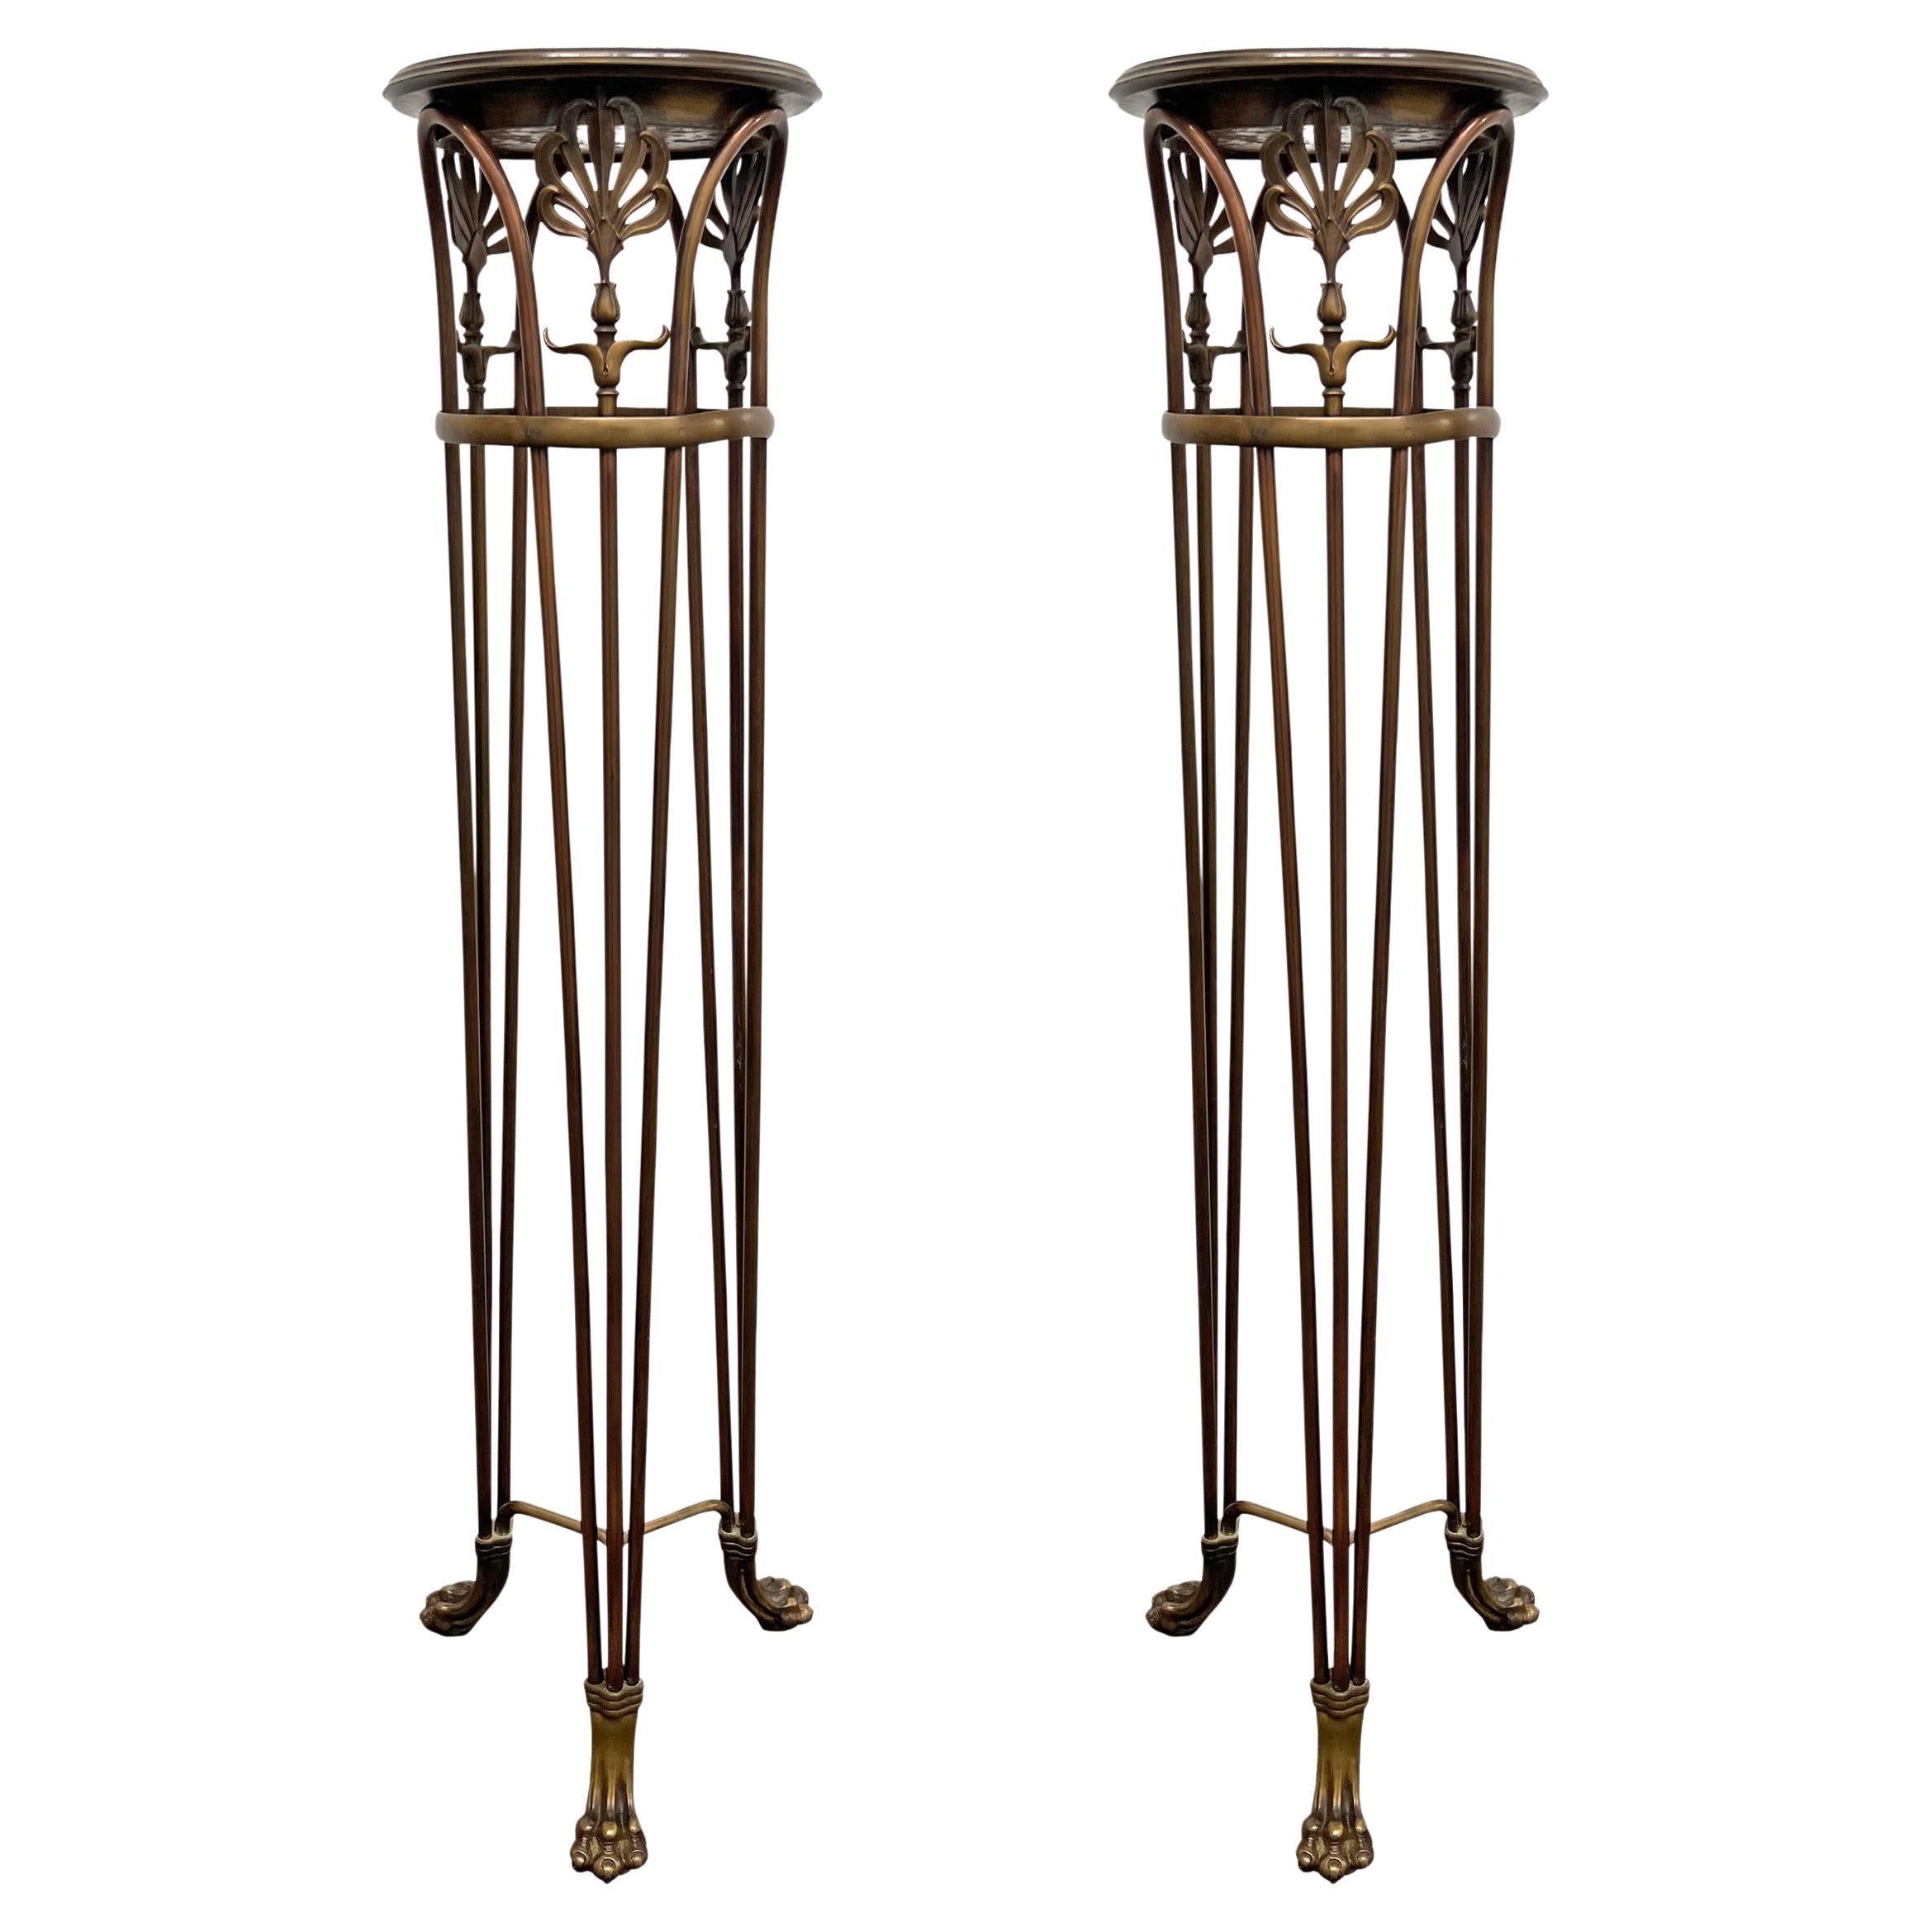 Pair of Early 20th Century American Beaux-Arts Pedestals by Gorham For Sale